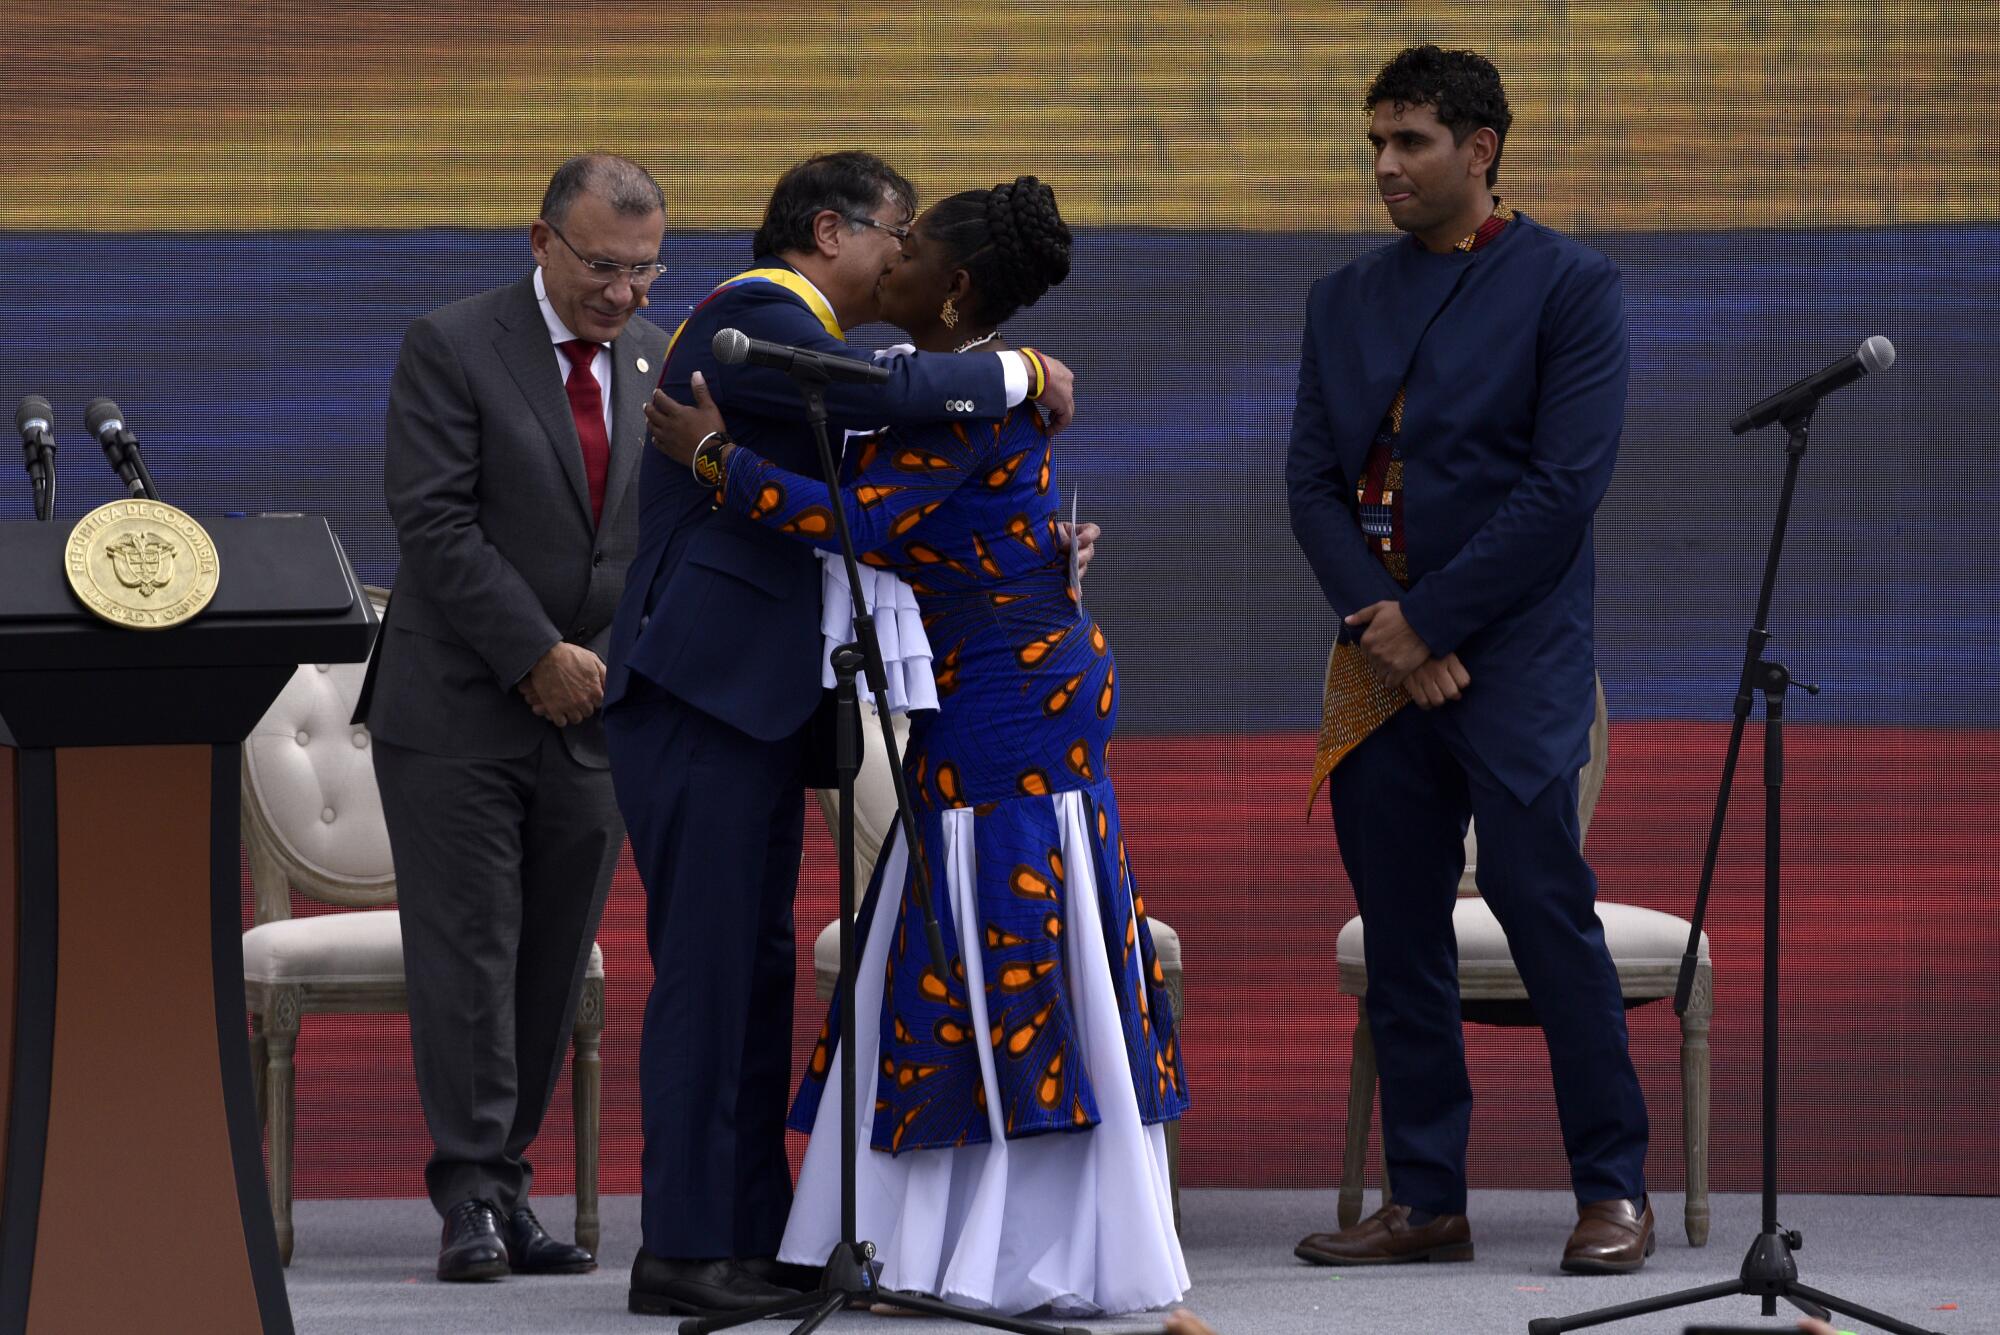 A man and woman embrace on stage while two other men stand by. 